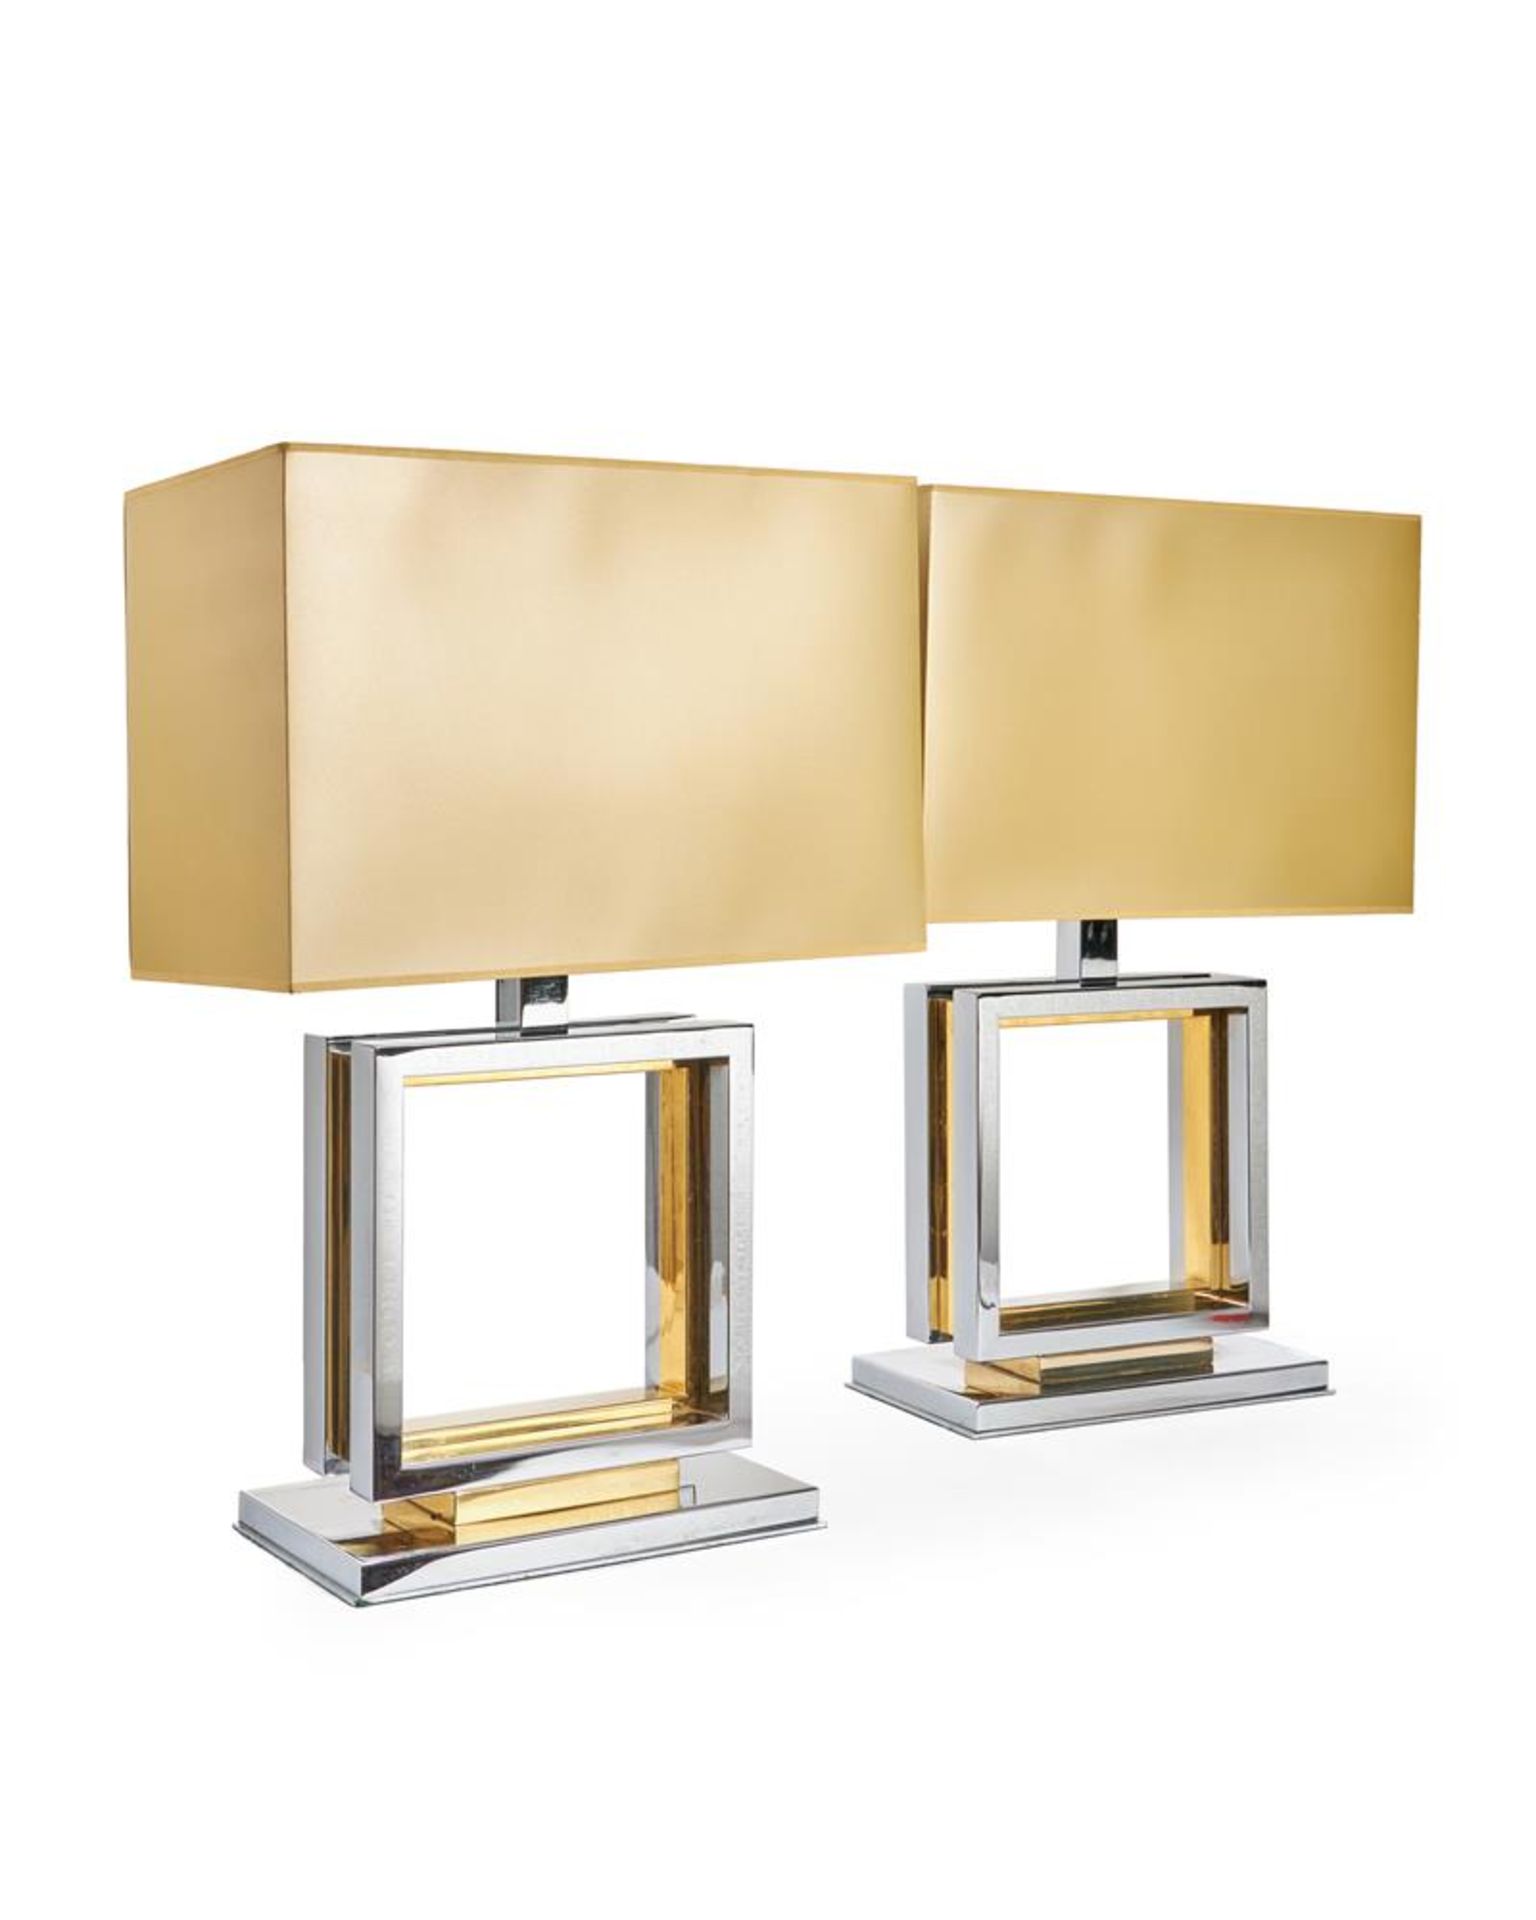 A PAIR OF ITALIAN CHROME AND BRASS TABLE LAMPS, CIRCA 1970 - Image 2 of 2